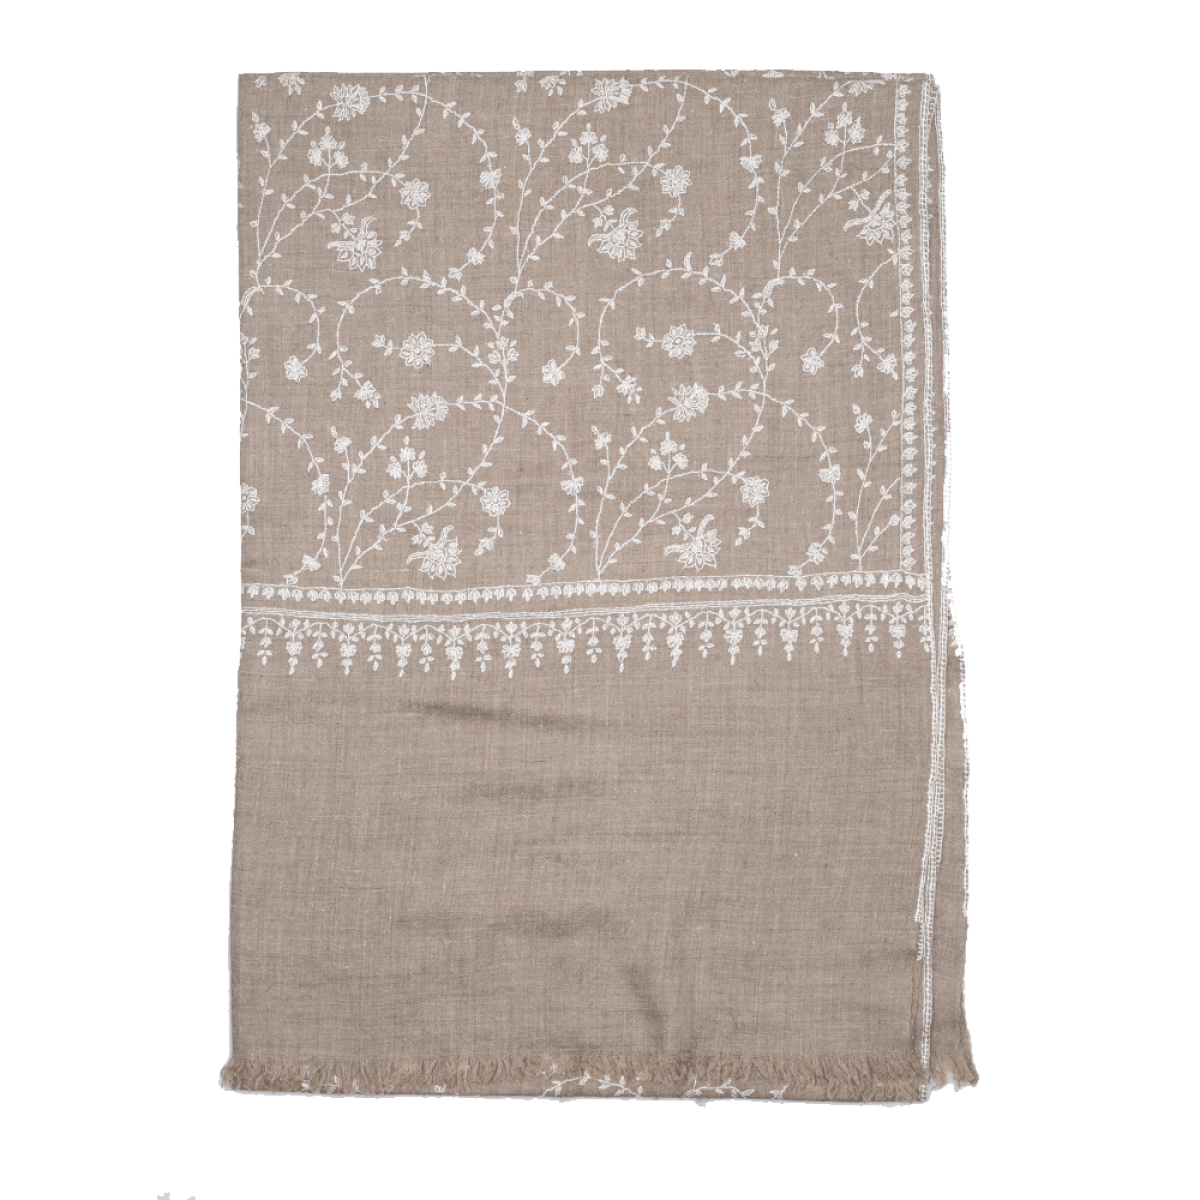 Embroidered Pashmina Stole - Natural & White